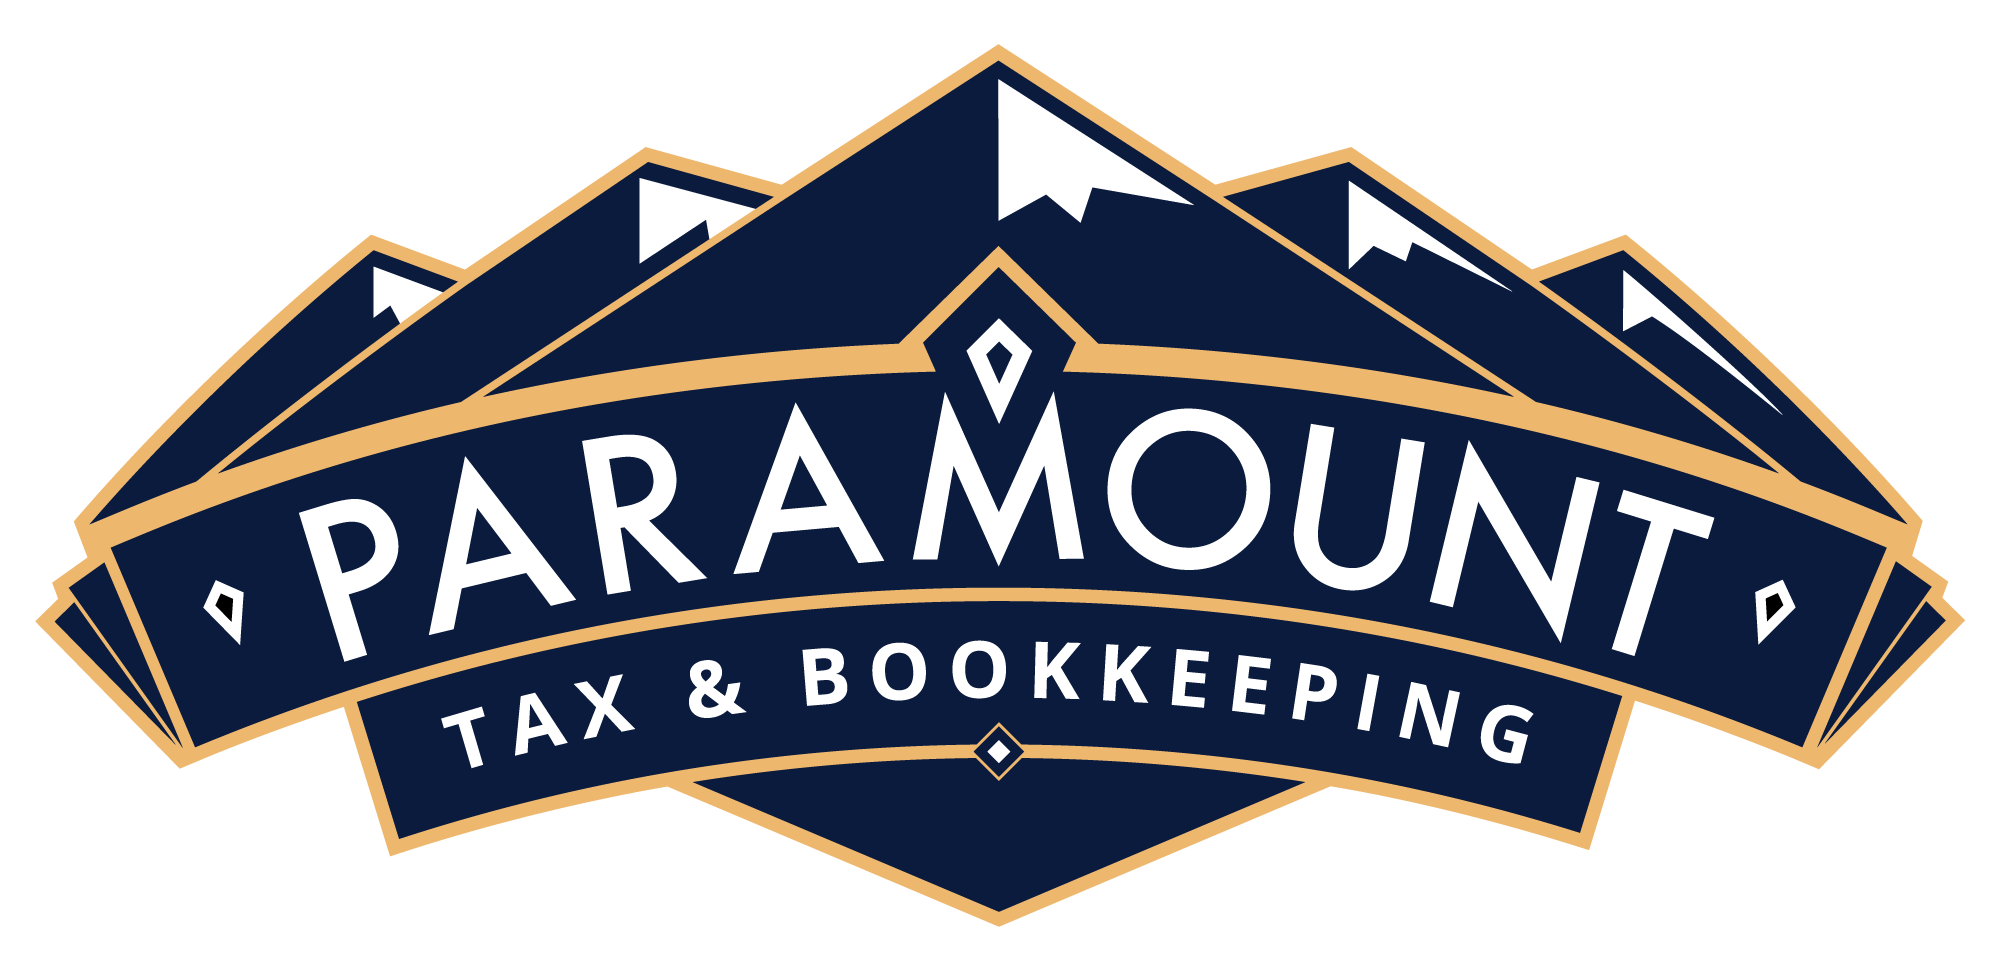 Review Paramount Tax & Bookkeeping - Plano West / Frisco